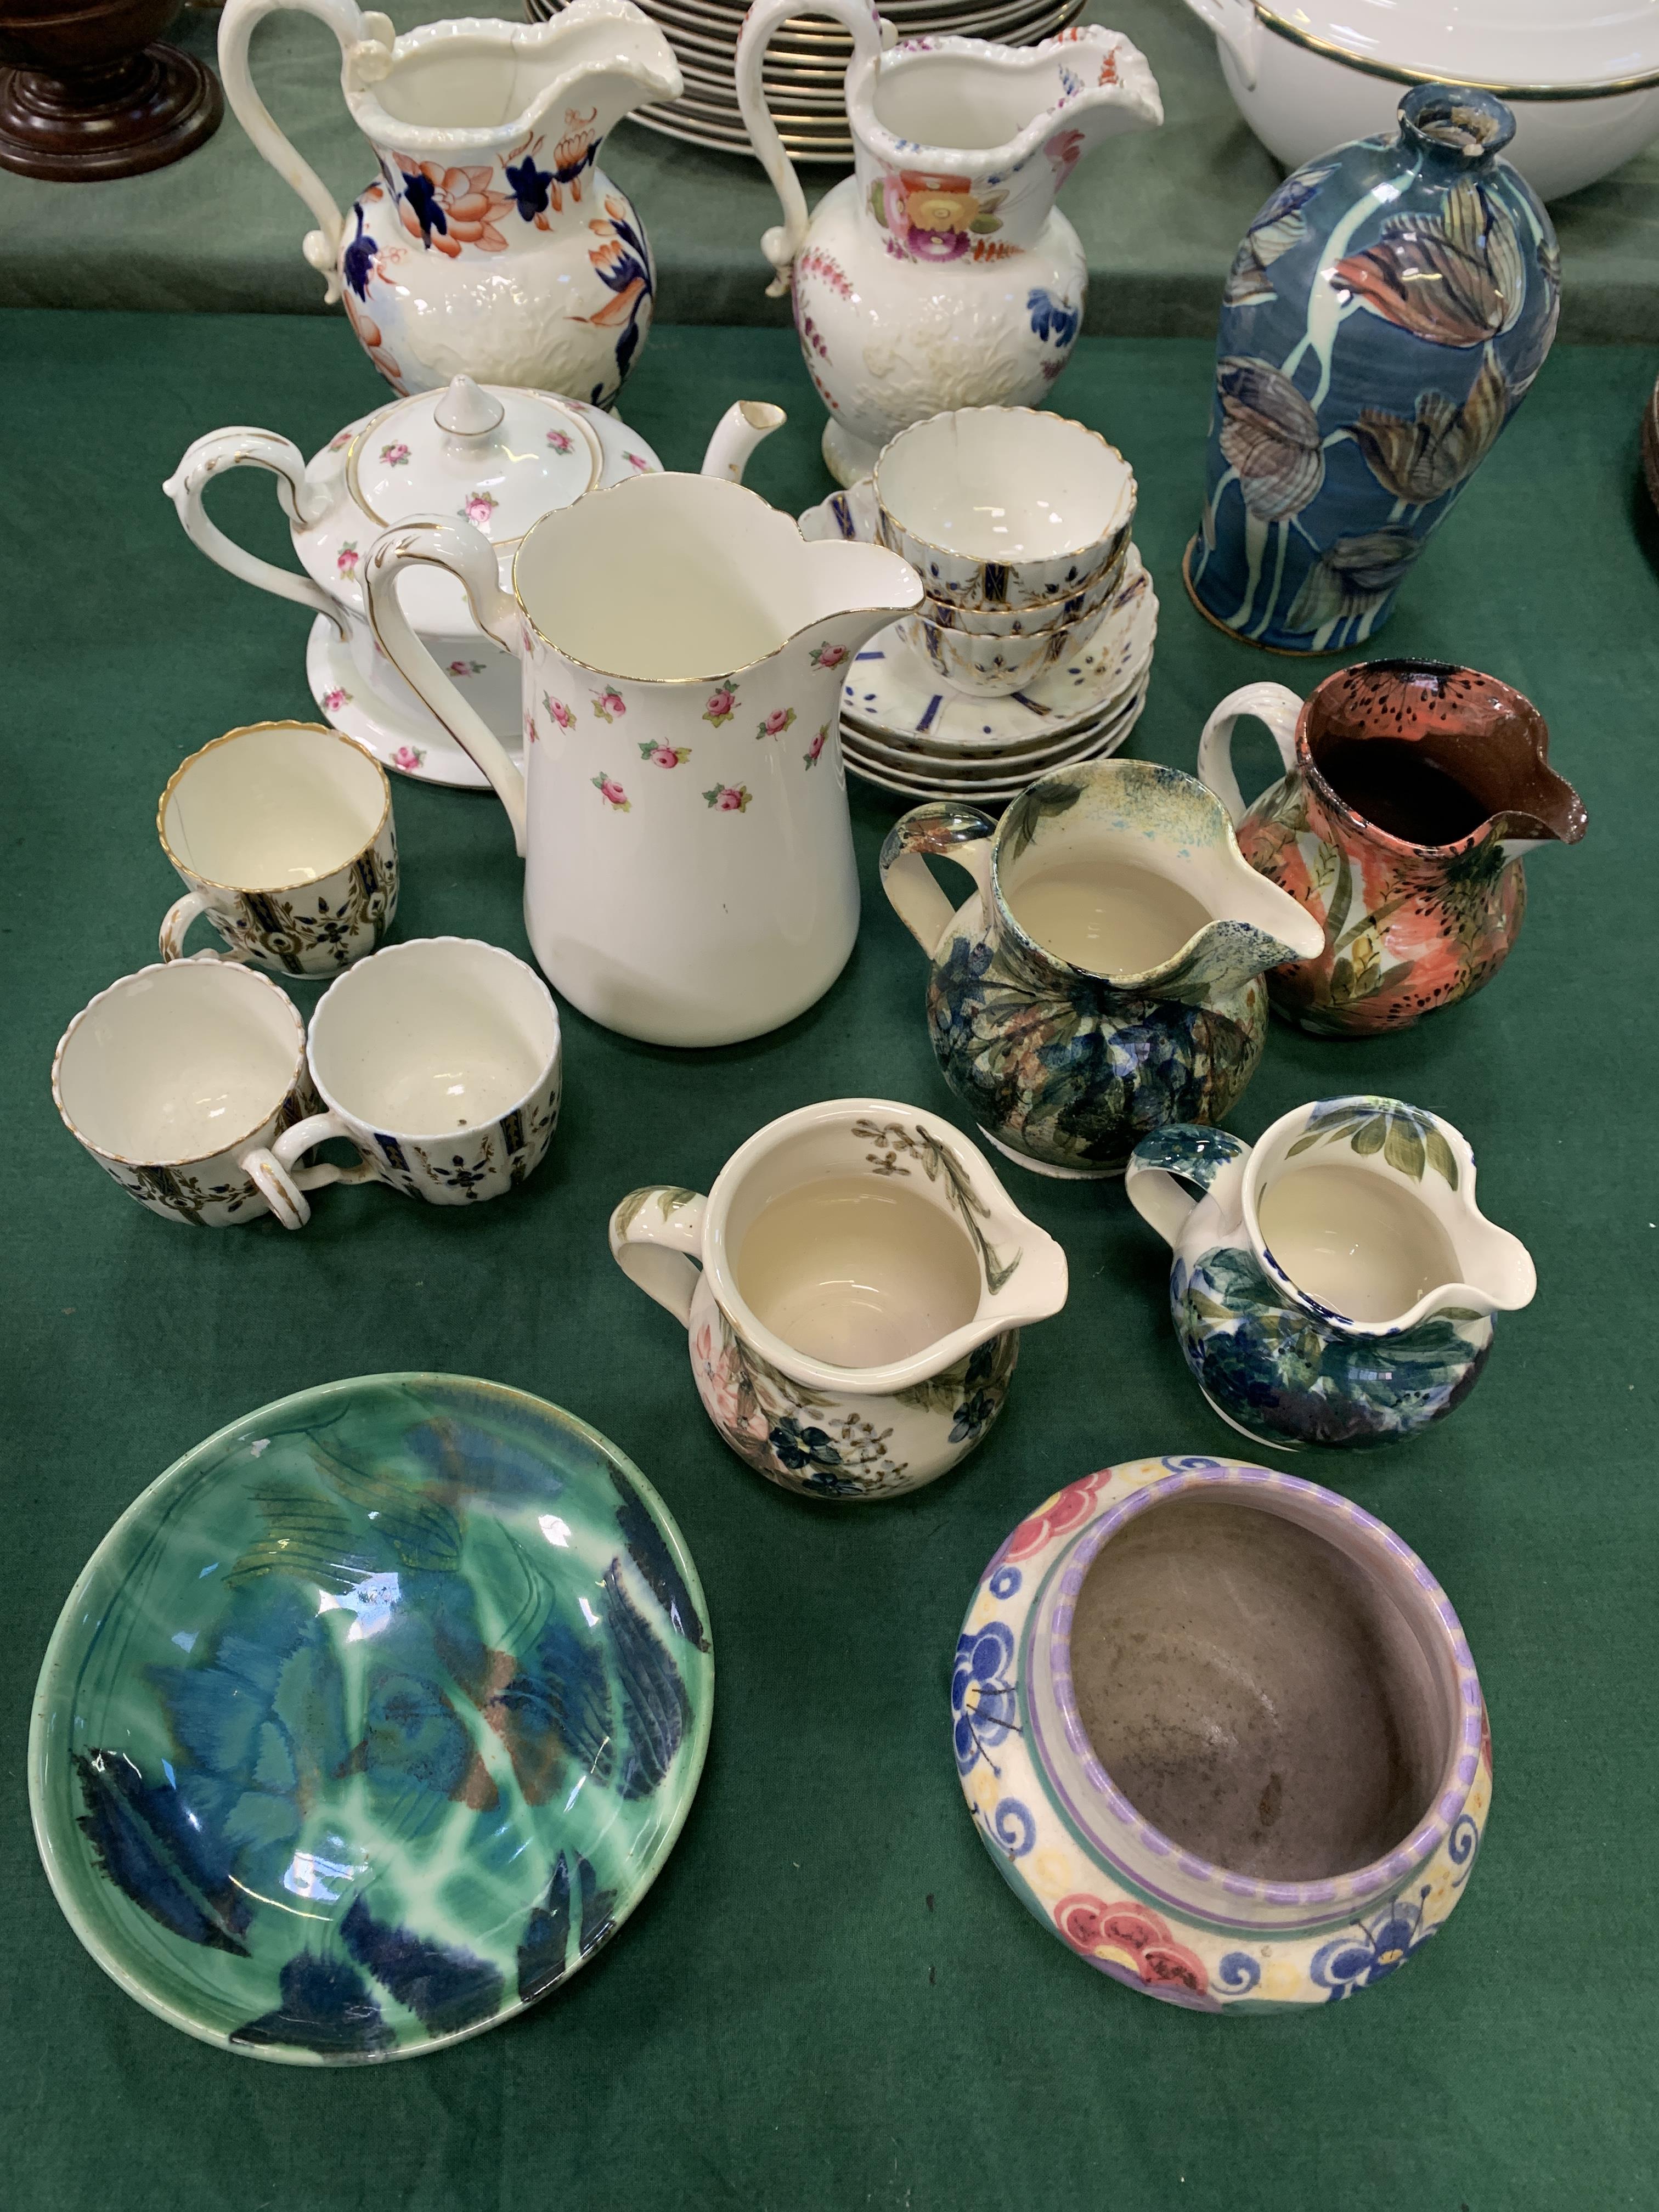 Collection of pottery and ceramic items